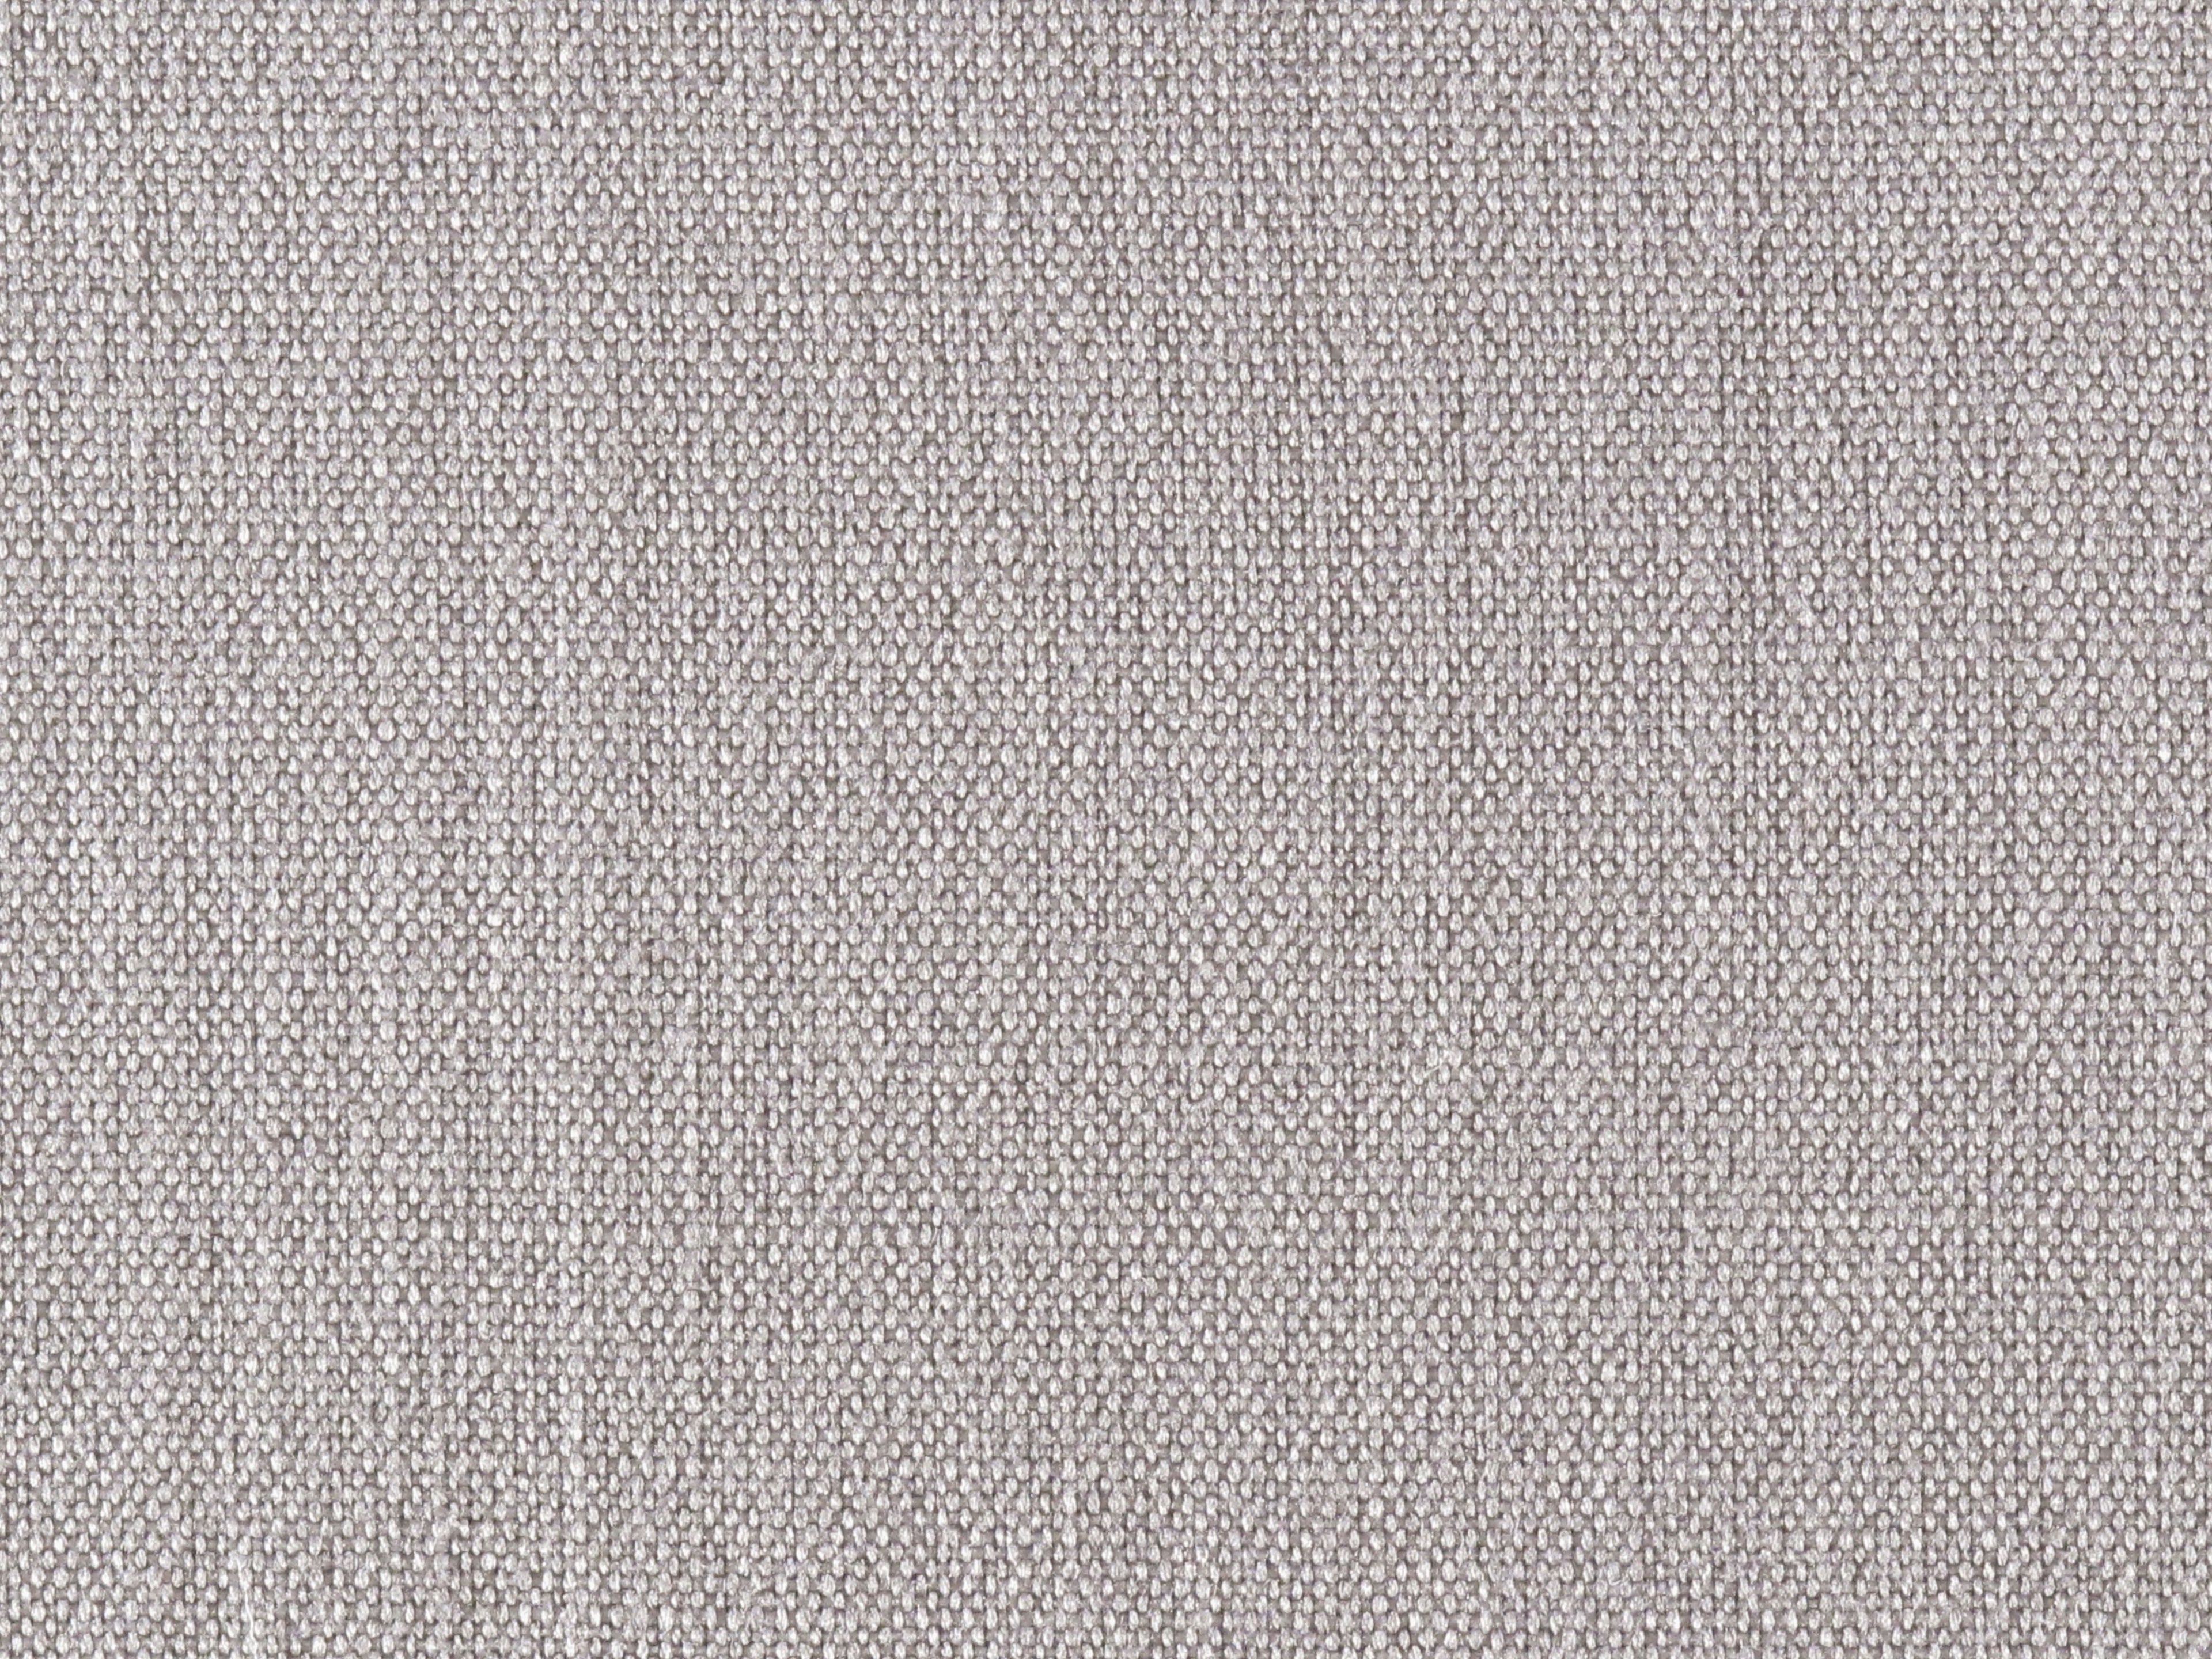 Lakeside Linen fabric in pewter color - pattern number PK 0012LAKE - by Scalamandre in the Old World Weavers collection